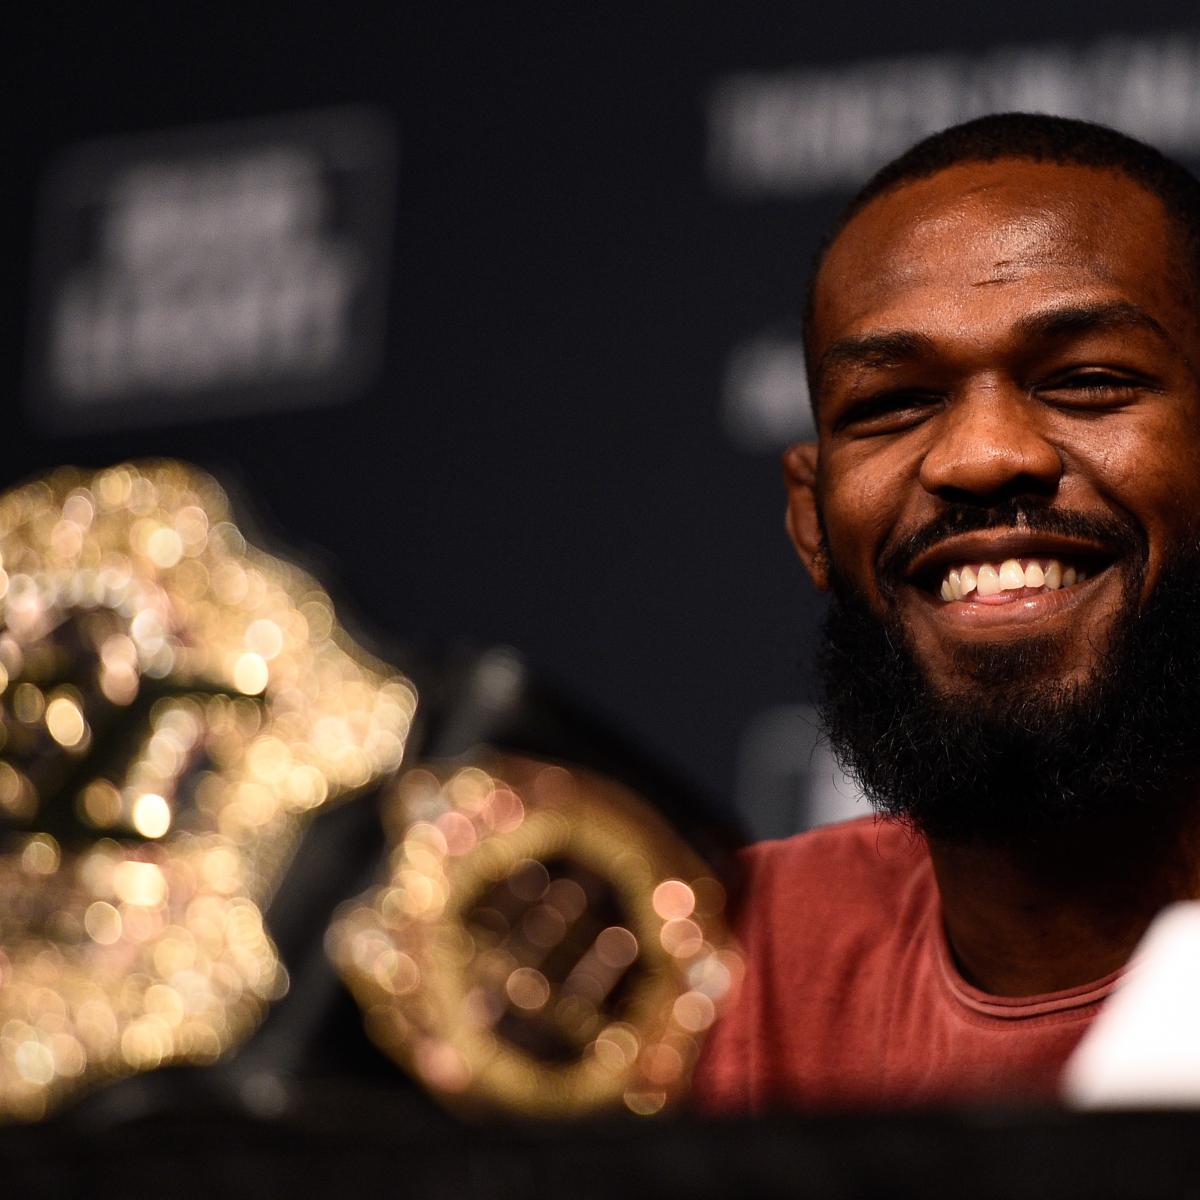 Jon Jones Goes on Another Twitter Rant, This Time About Steroids | News ...